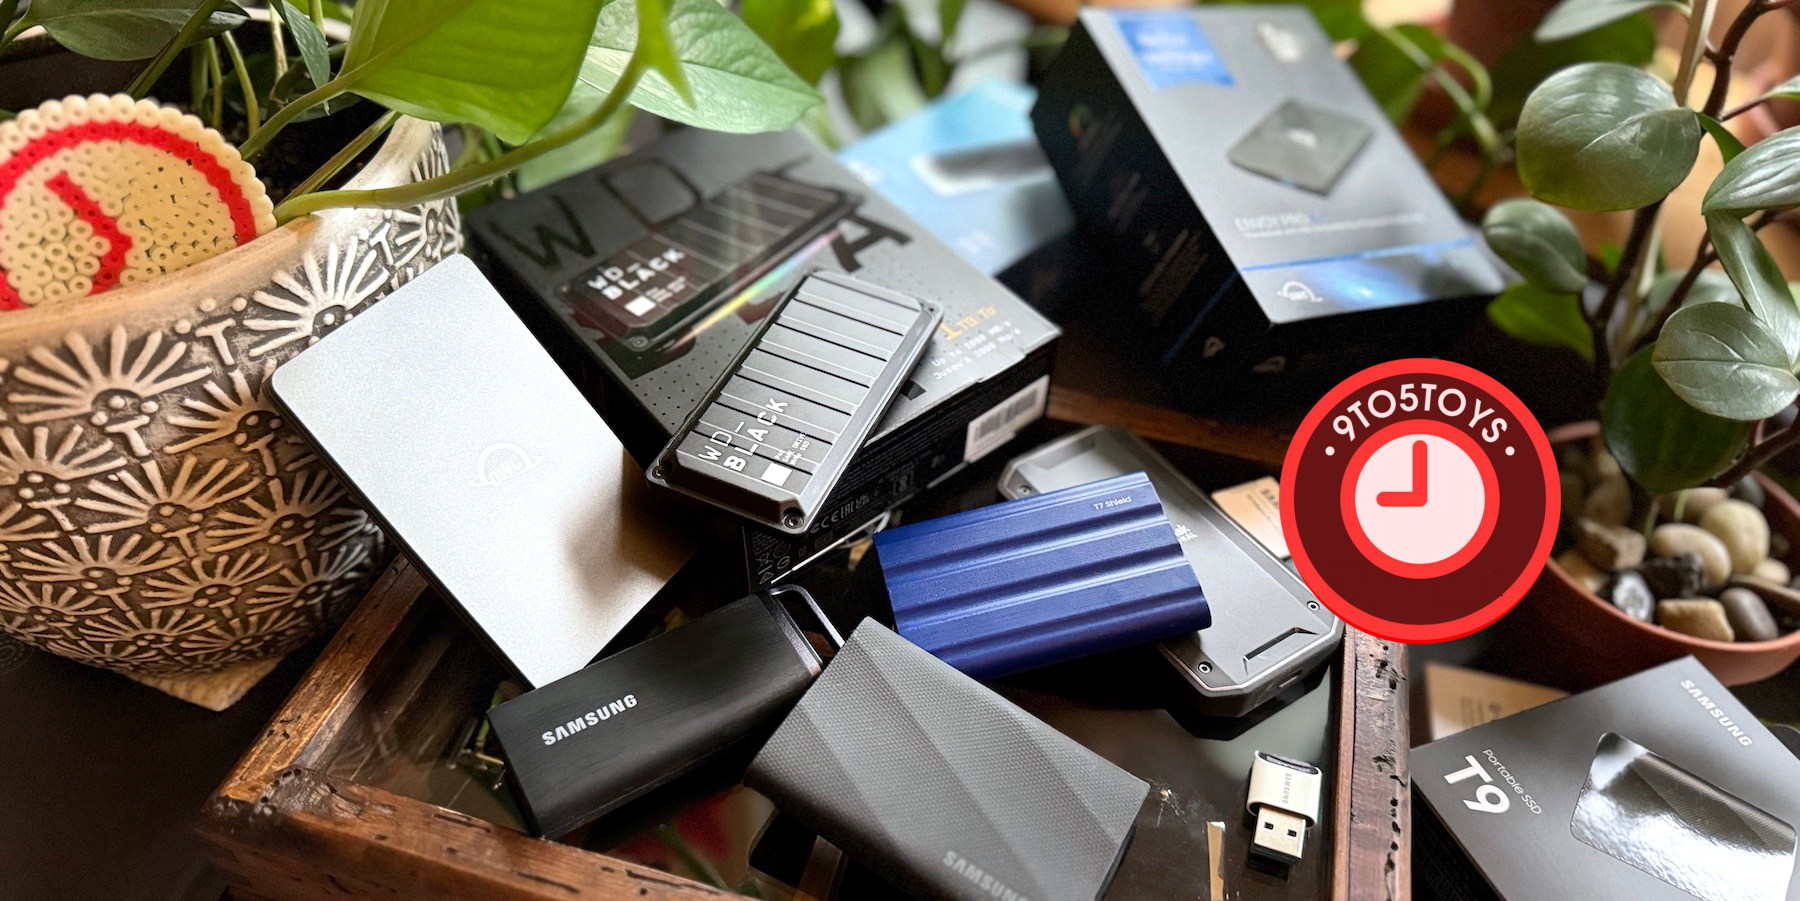 A Quick Look At The Crucial X9 Pro And X10 Pro Portable SSDs - PC